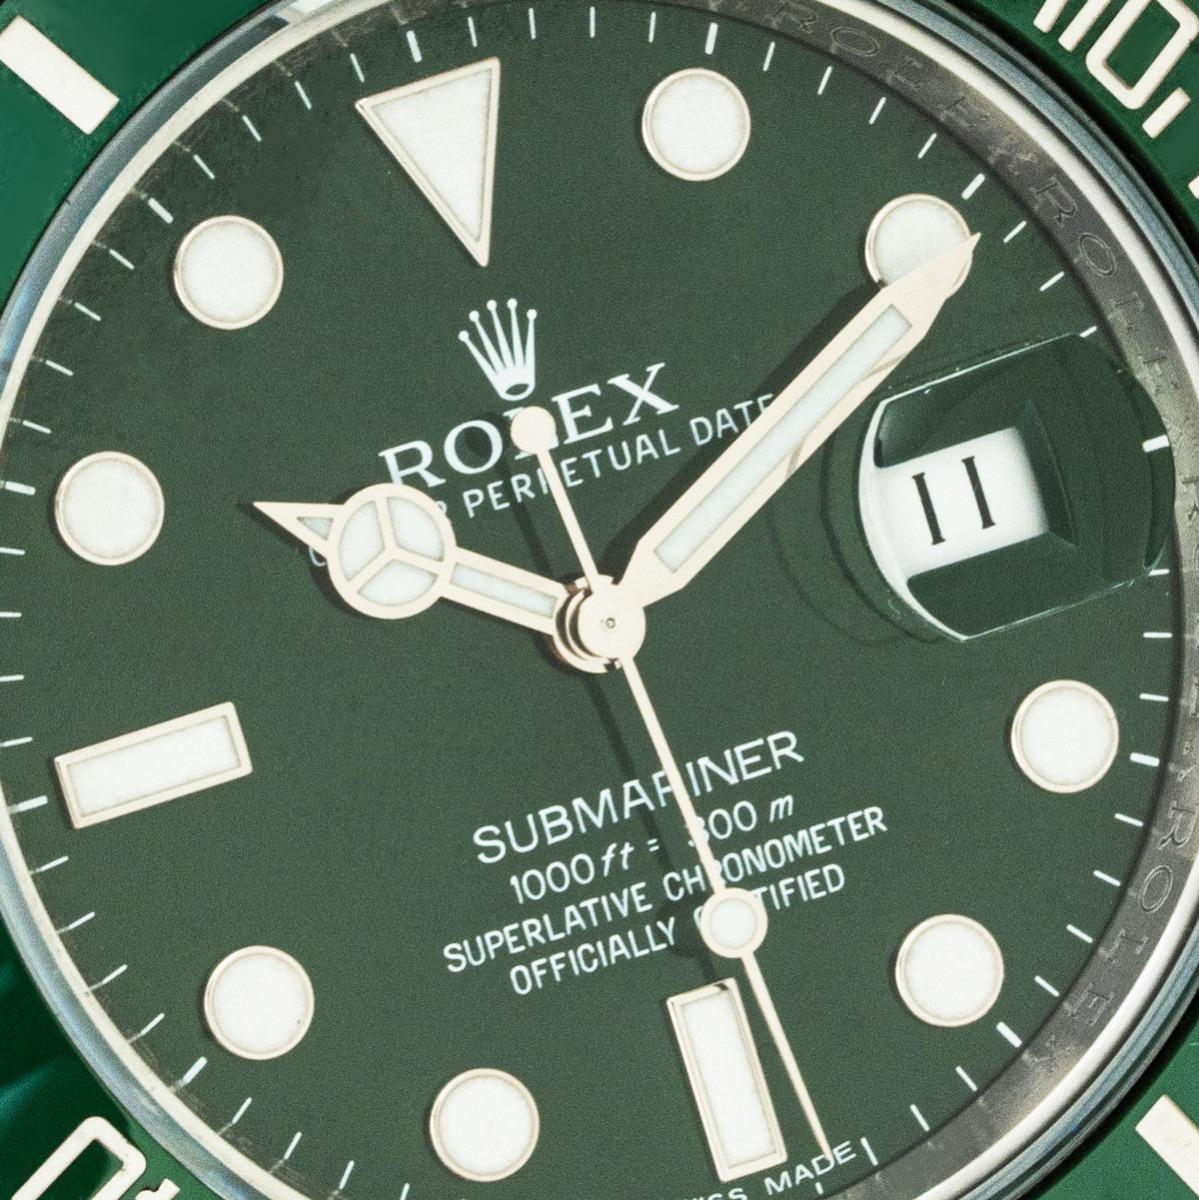 A Submariner Date Hulk in Oystersteel by Rolex. Featuring a green dial with a green unidirectional rotatable ceramic bezel which features 60 minute graduations. Fitted with a scratch-resistant sapphire crystal, a self-winding automatic movement and